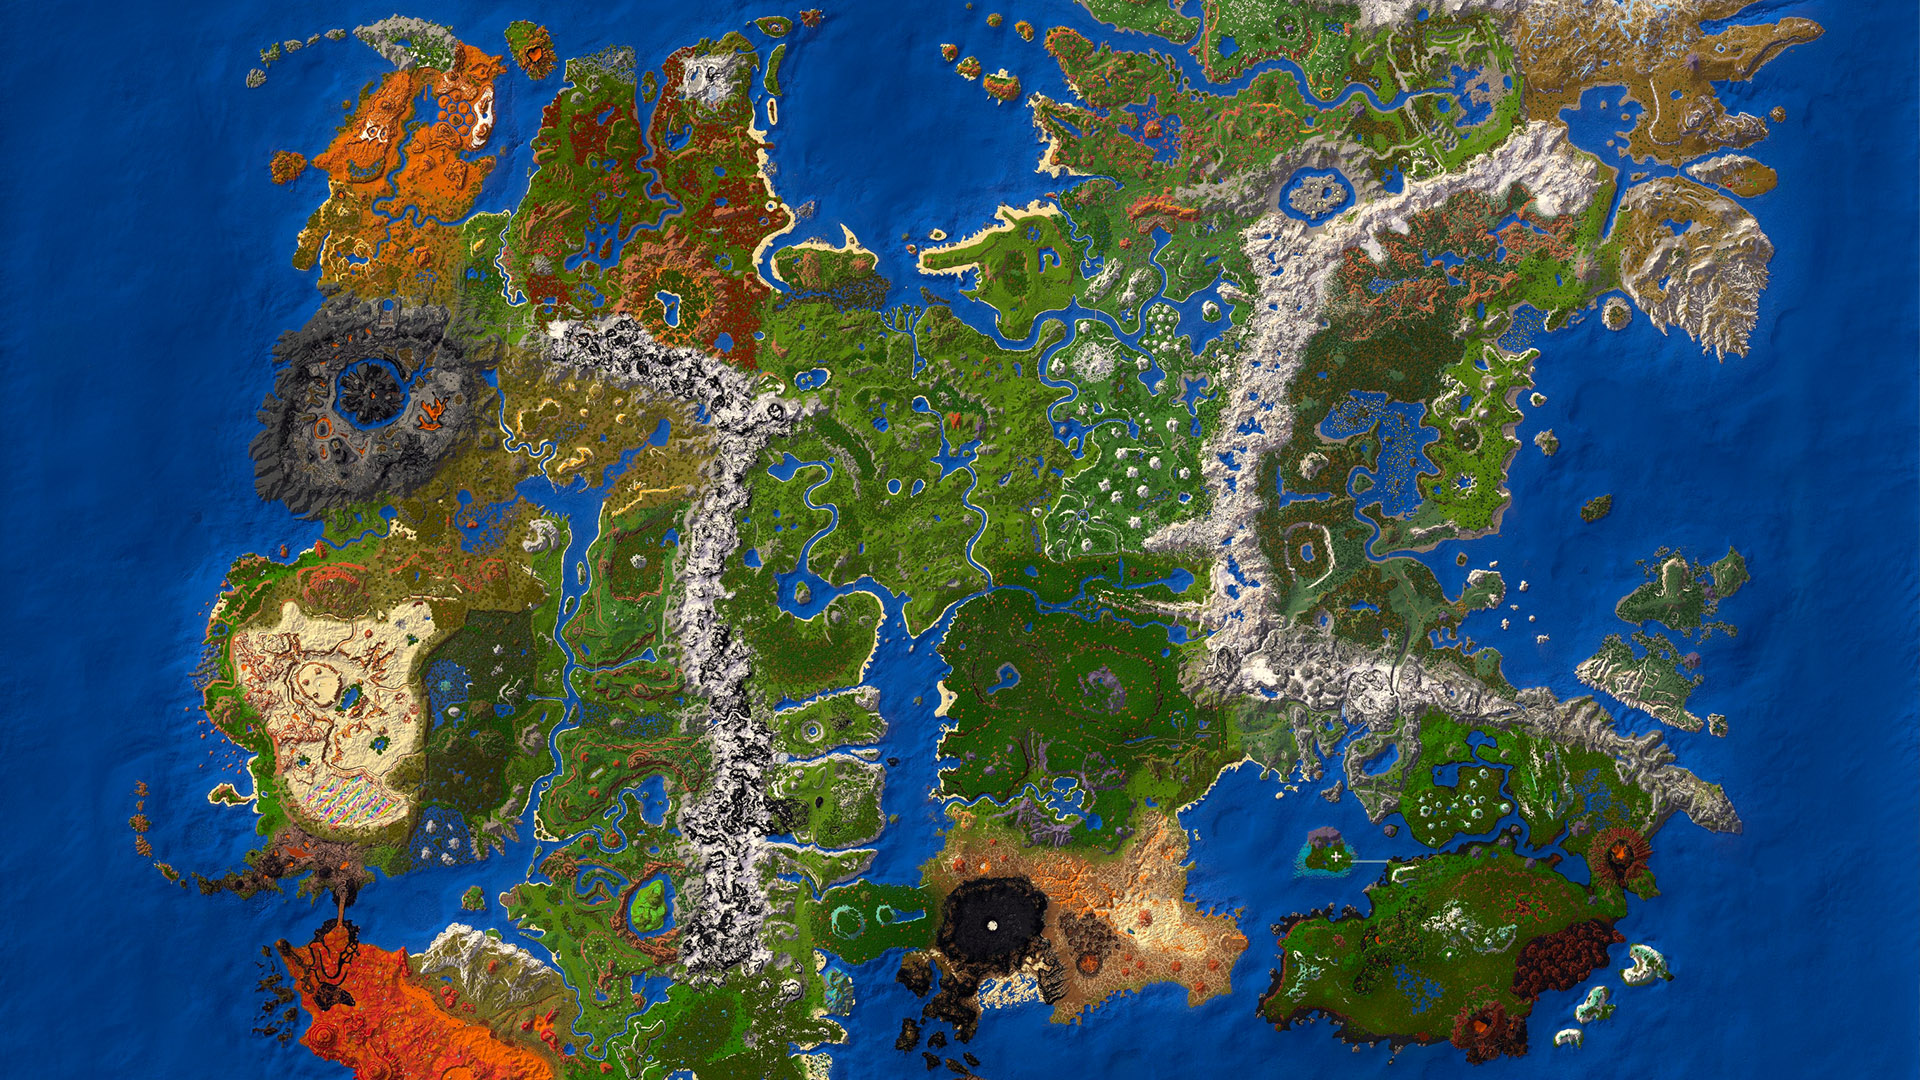 This Minecraft map turns the game into an RPG